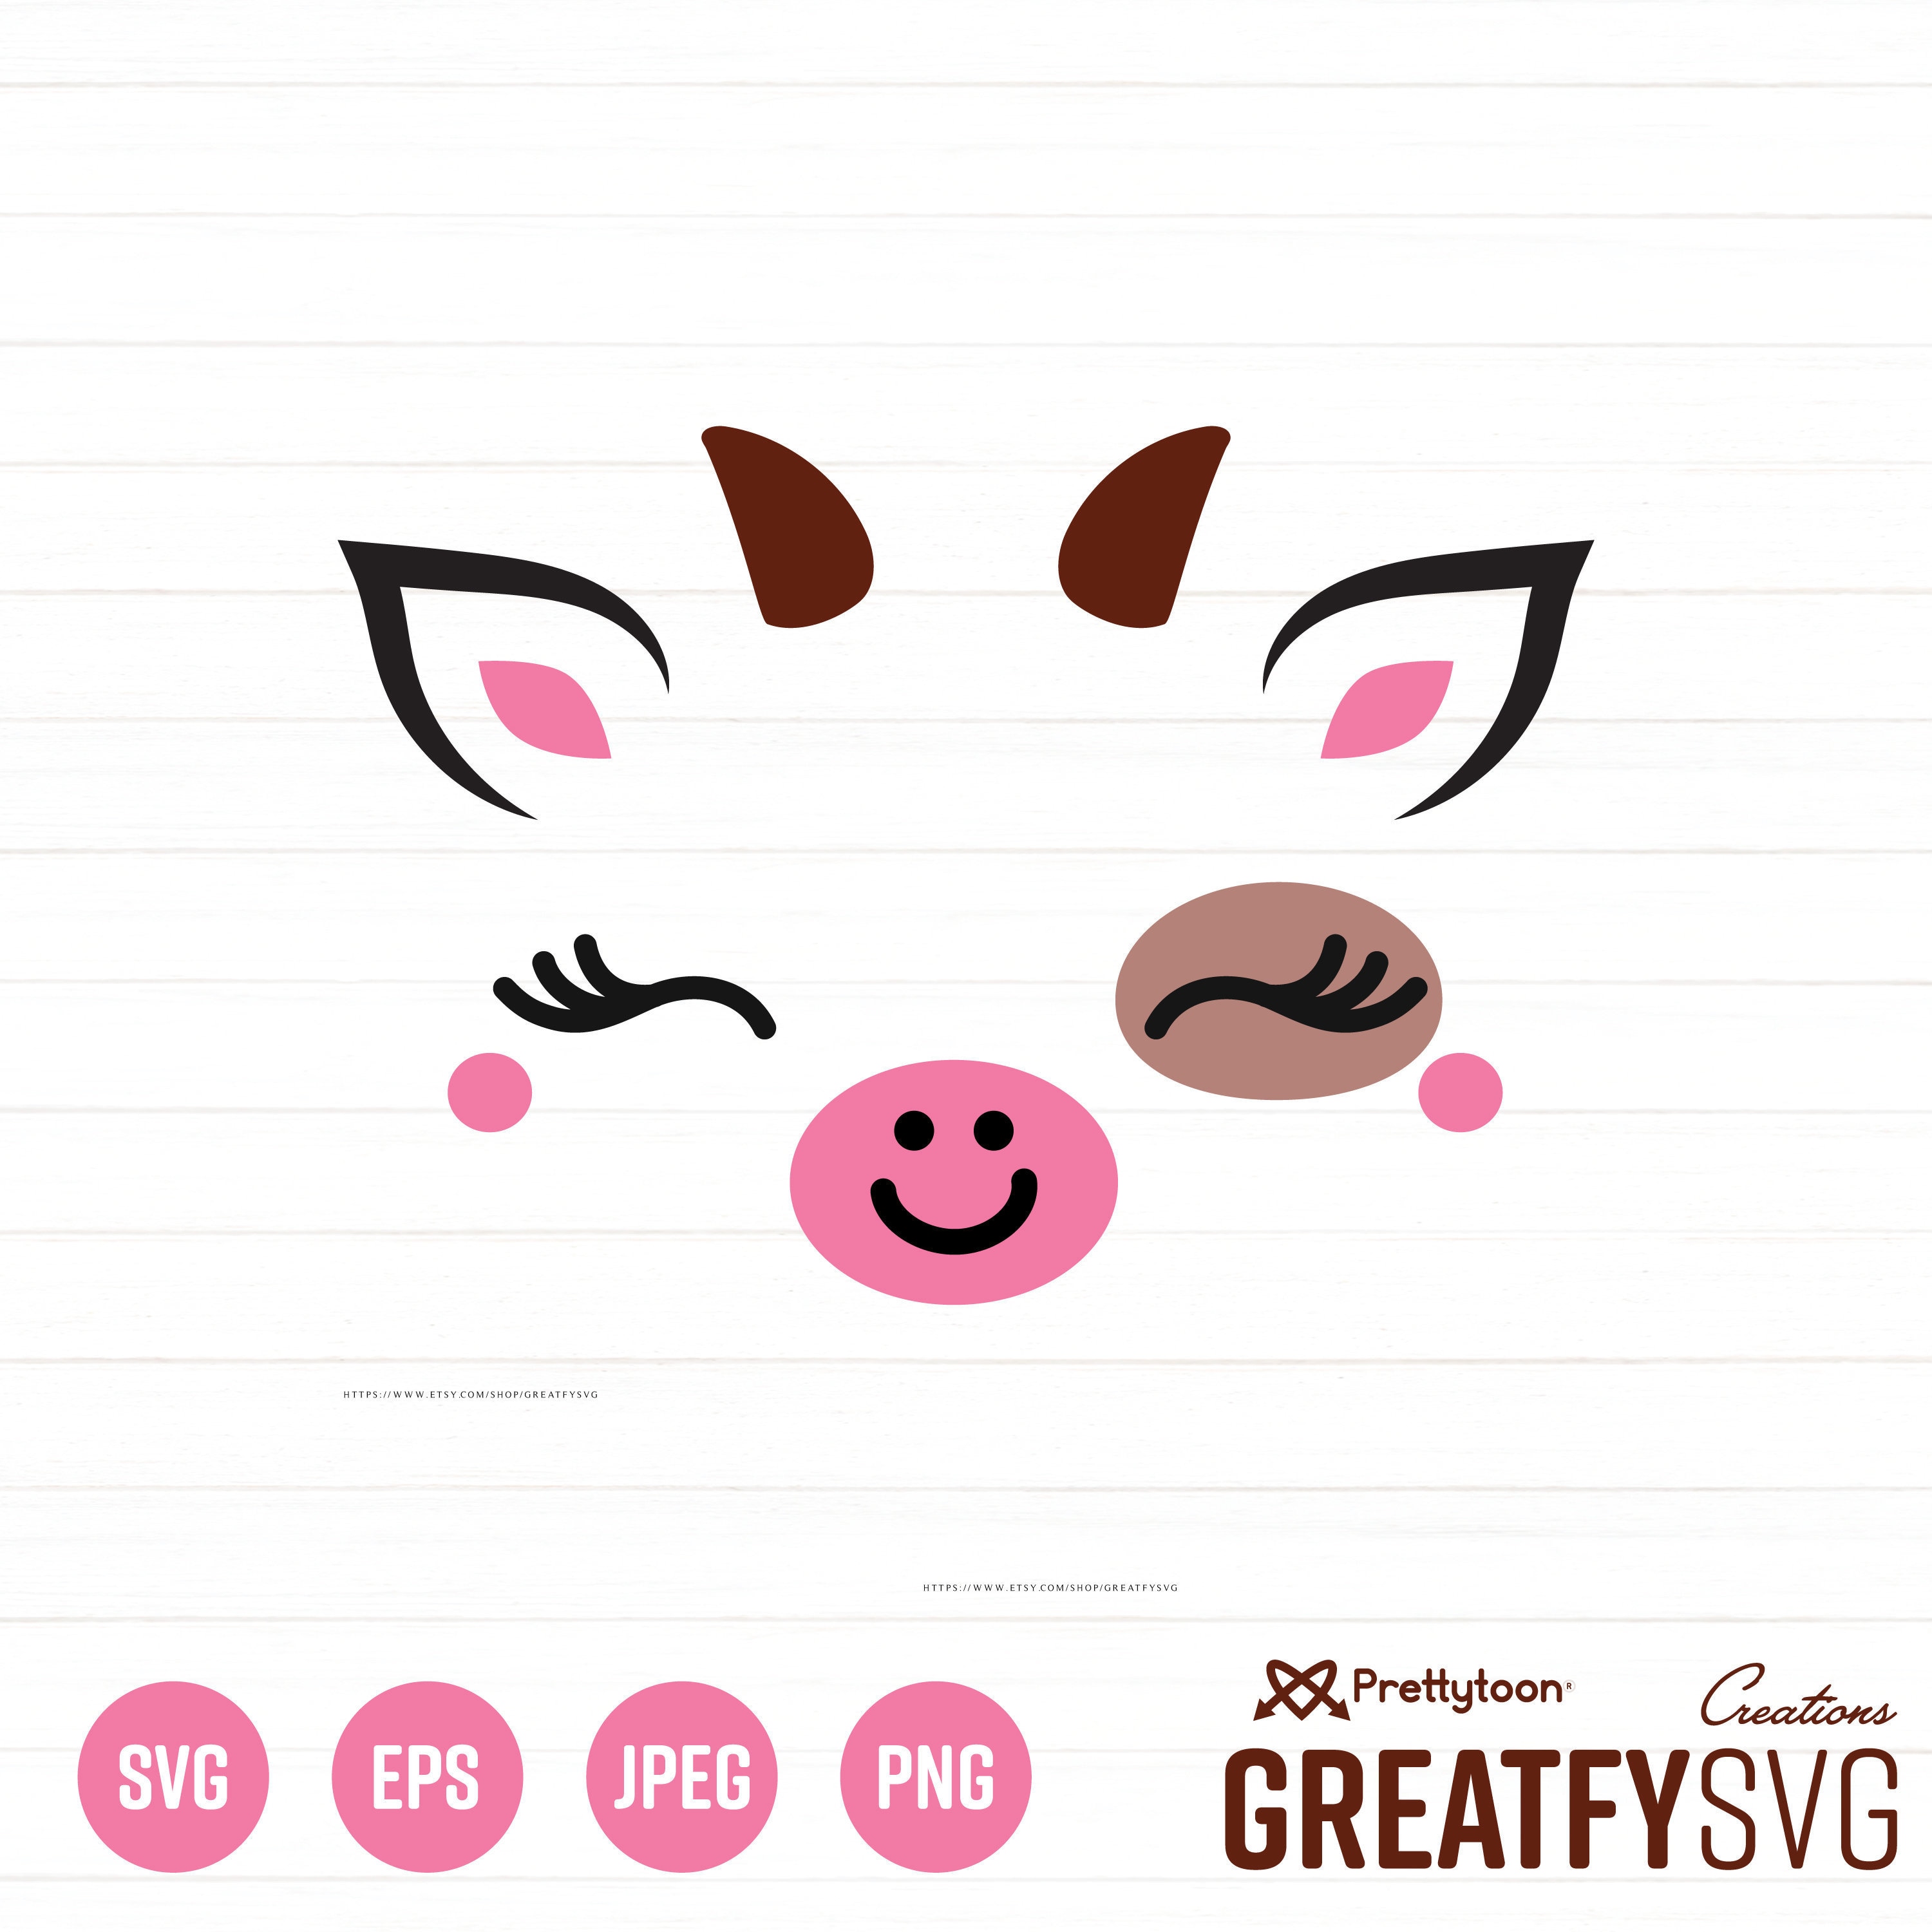 Cow Print Stickers – Stationery Creations